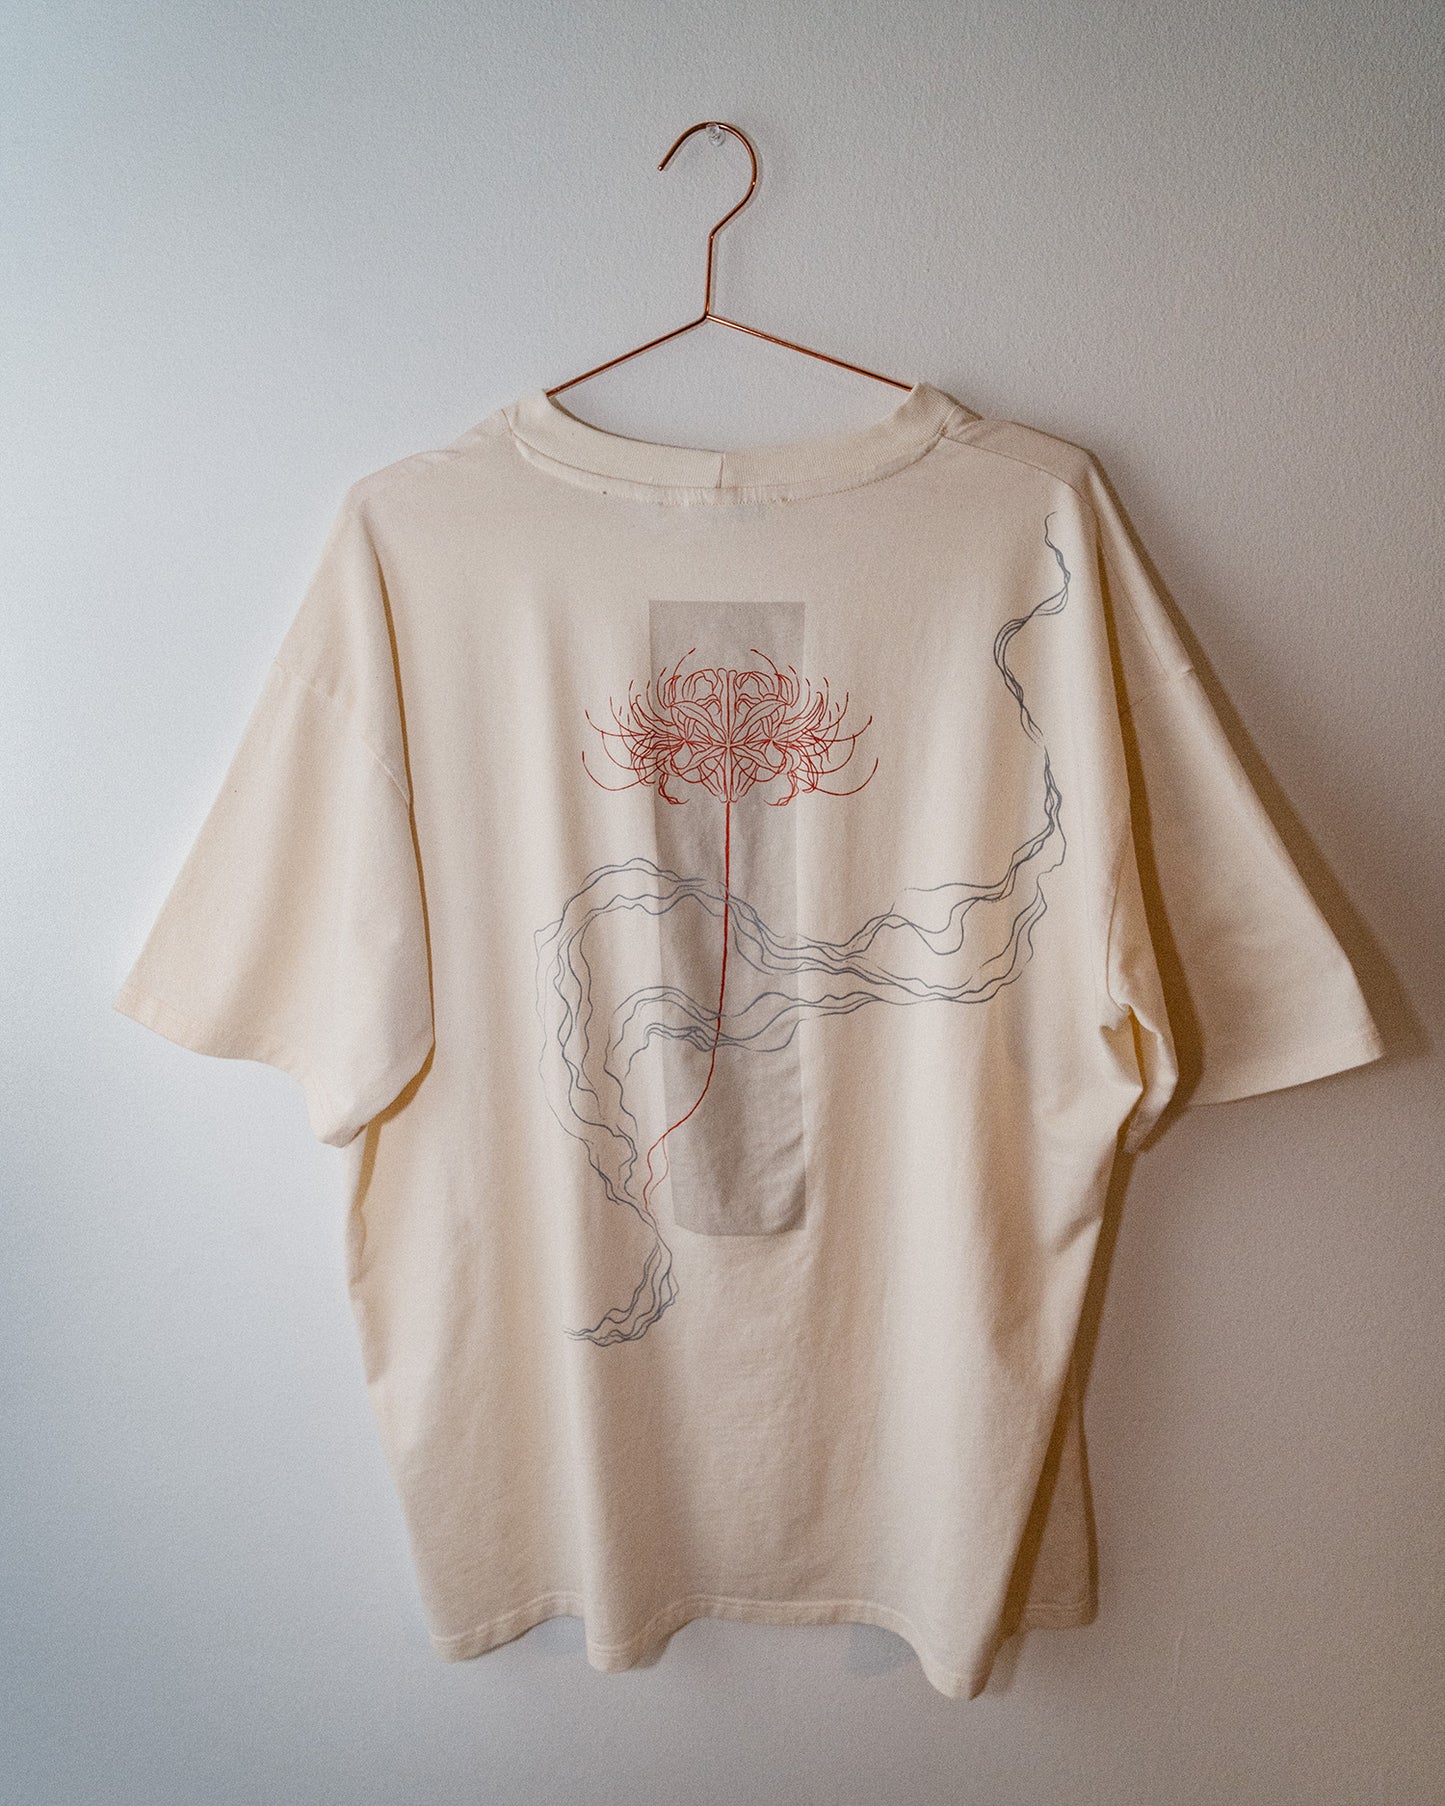 Red Spider Lily Tee /// Undyed Reclaimed Cotton /// Red 彼岸花 (Higanbana) - The Flower of Death